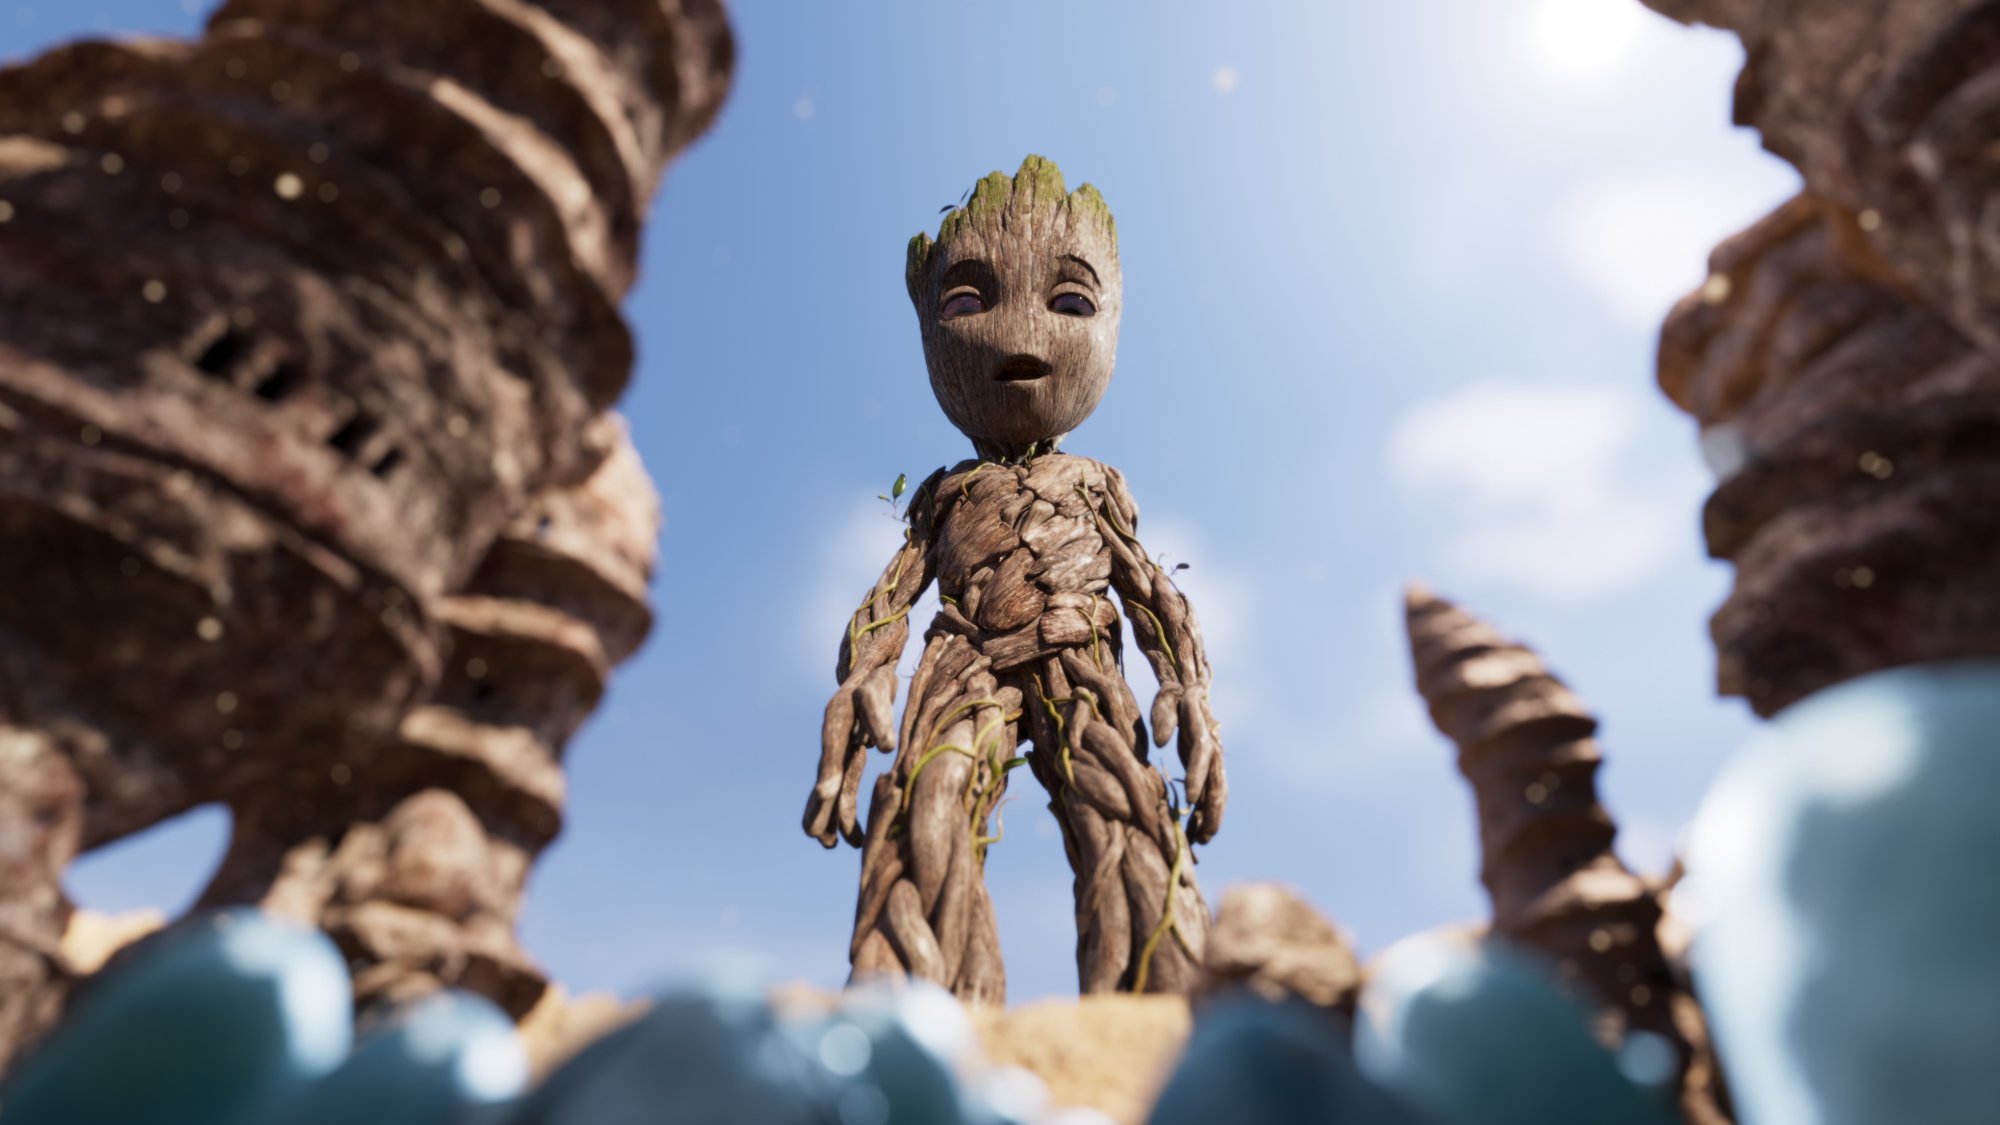 Baby Groot in Marvel's 'I Am Groot' shorts, which don't share a story with the 'Guardians of the Galaxy' movies. In the image, Baby Groot is towering over small blue aliens.